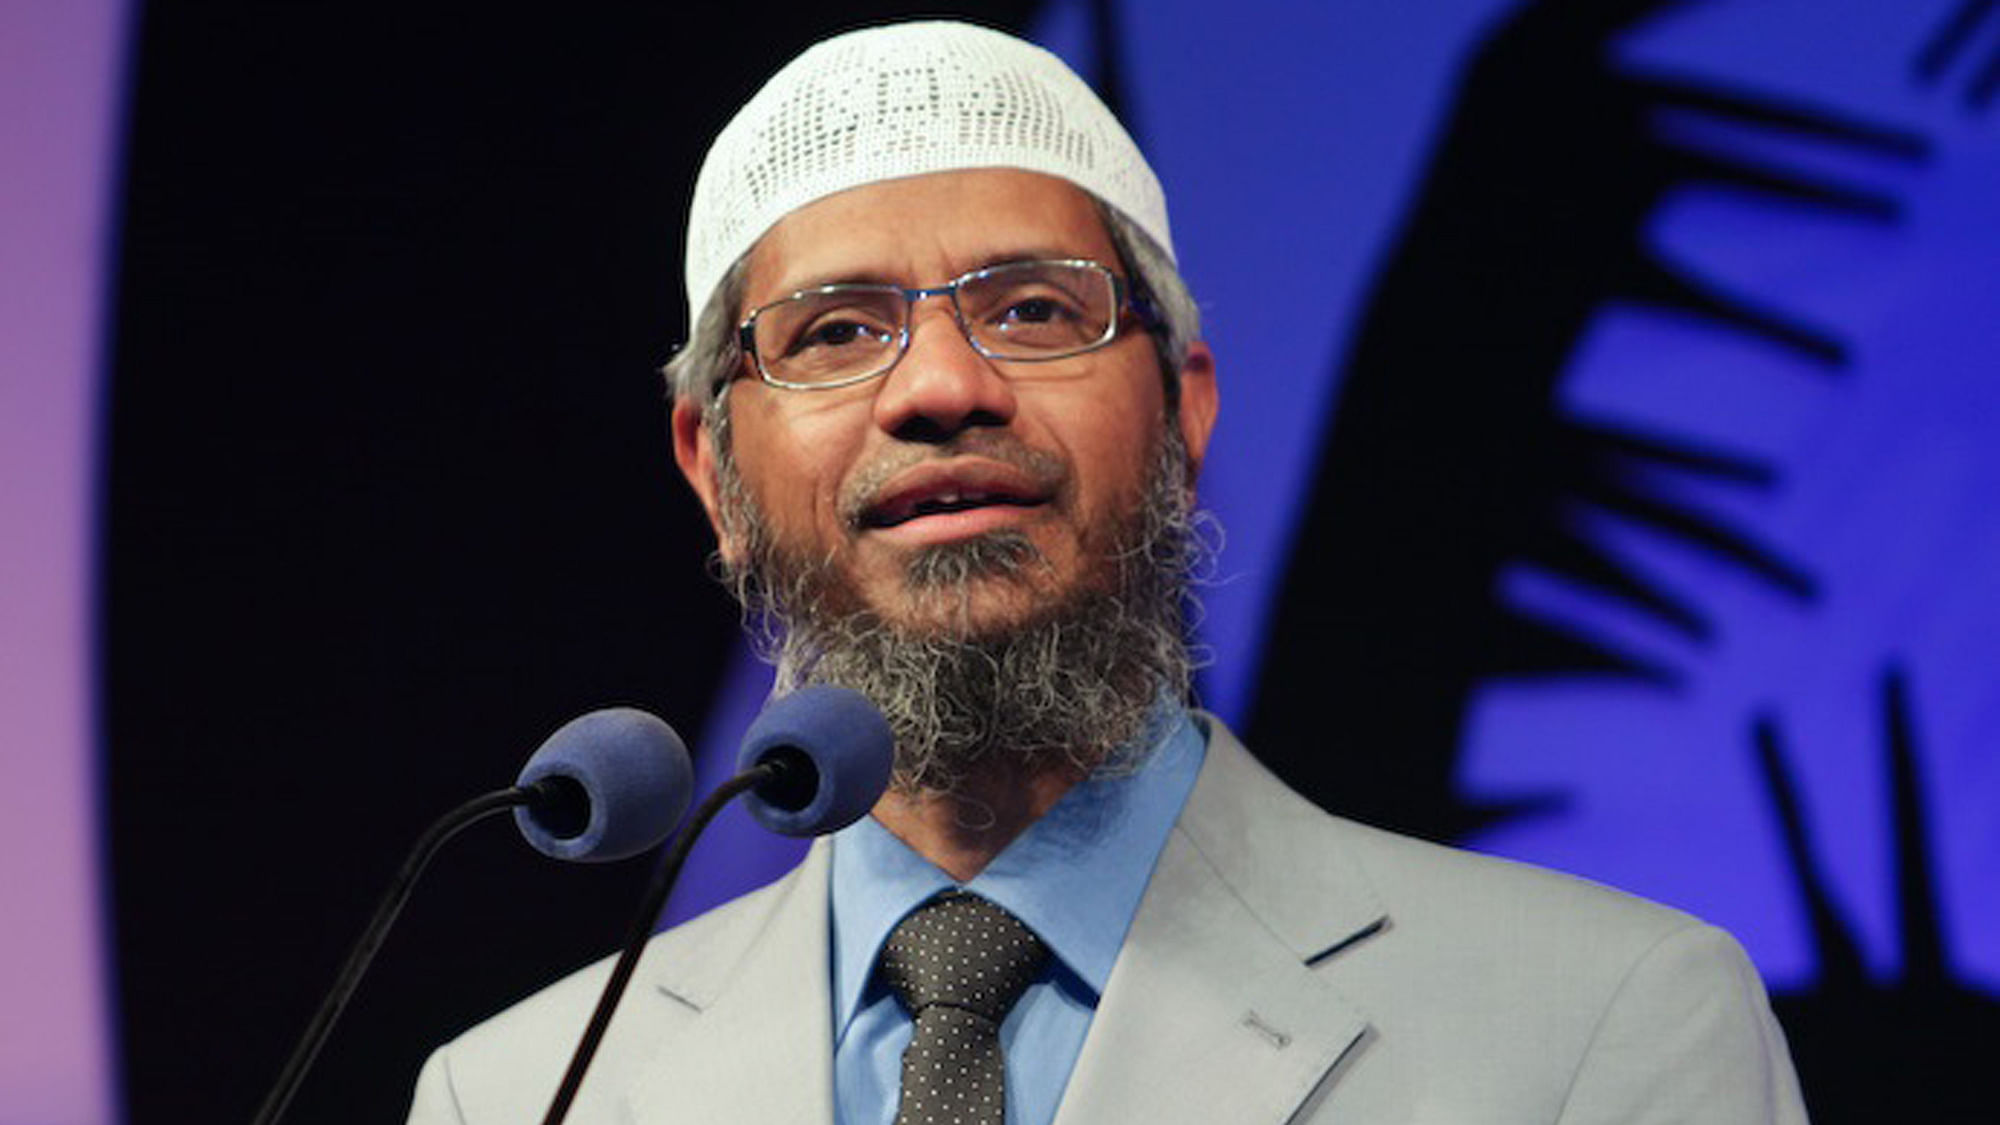 Zakir Naik said on Friday that the ban didn’t take into account his side of the story. (Photo: TNM)